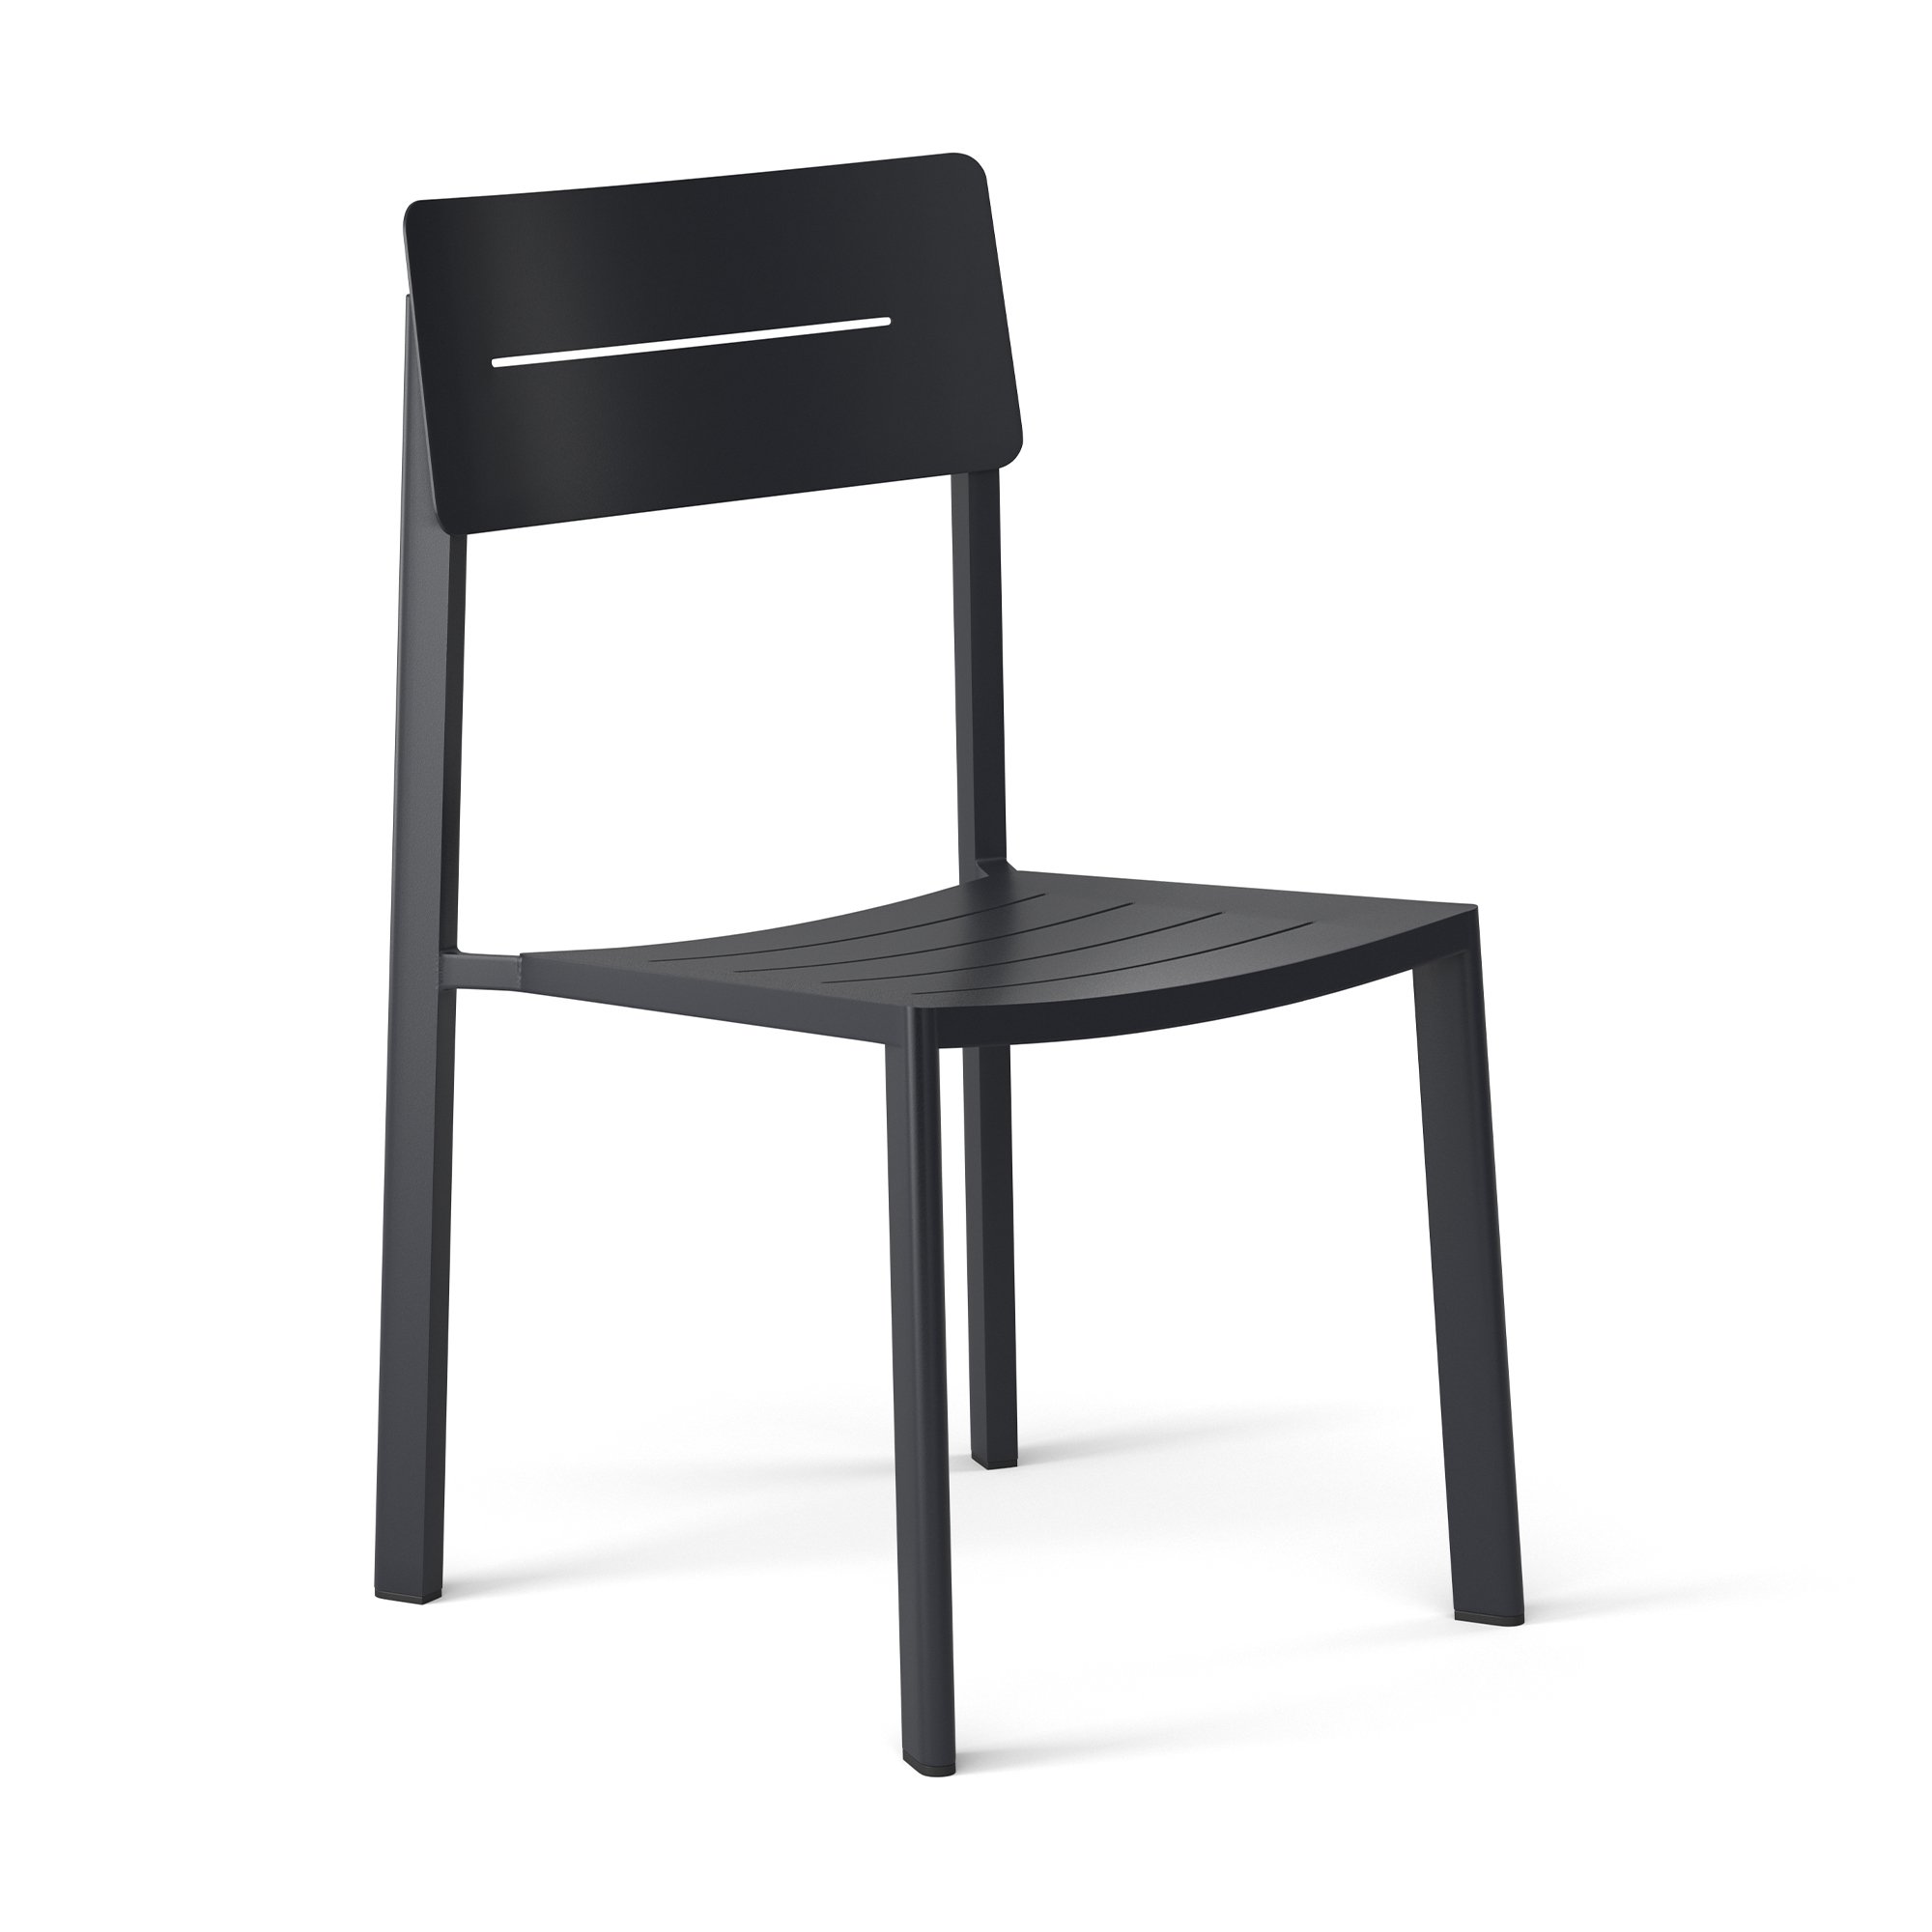 Highline Outdoor Side Chair in Black By The Conran Shop